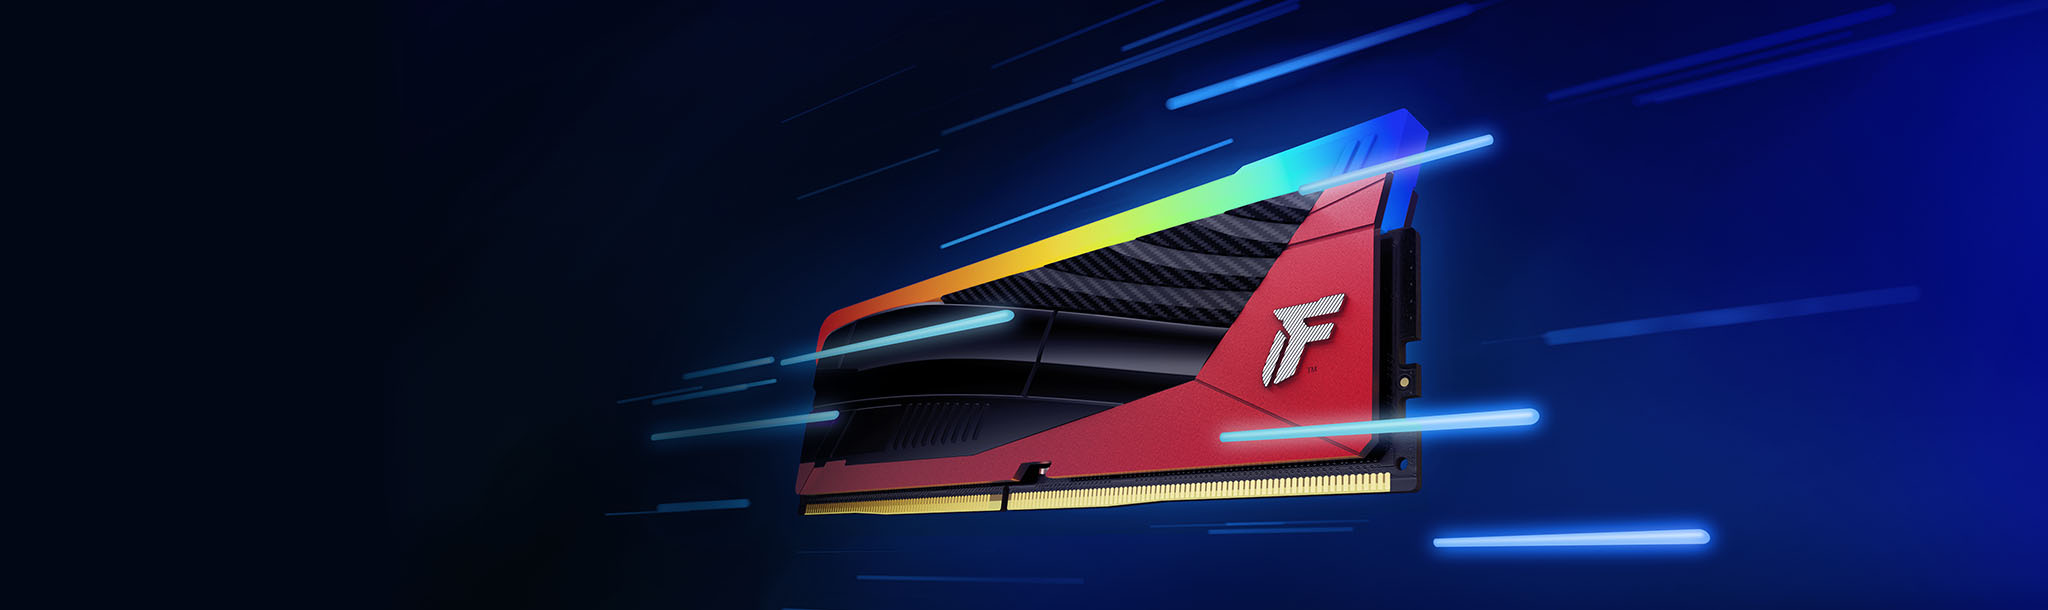 A Kingston FURY Renegade DDR5 RGB Limited Edition module surrounded motion blur streaks to symbolize speed